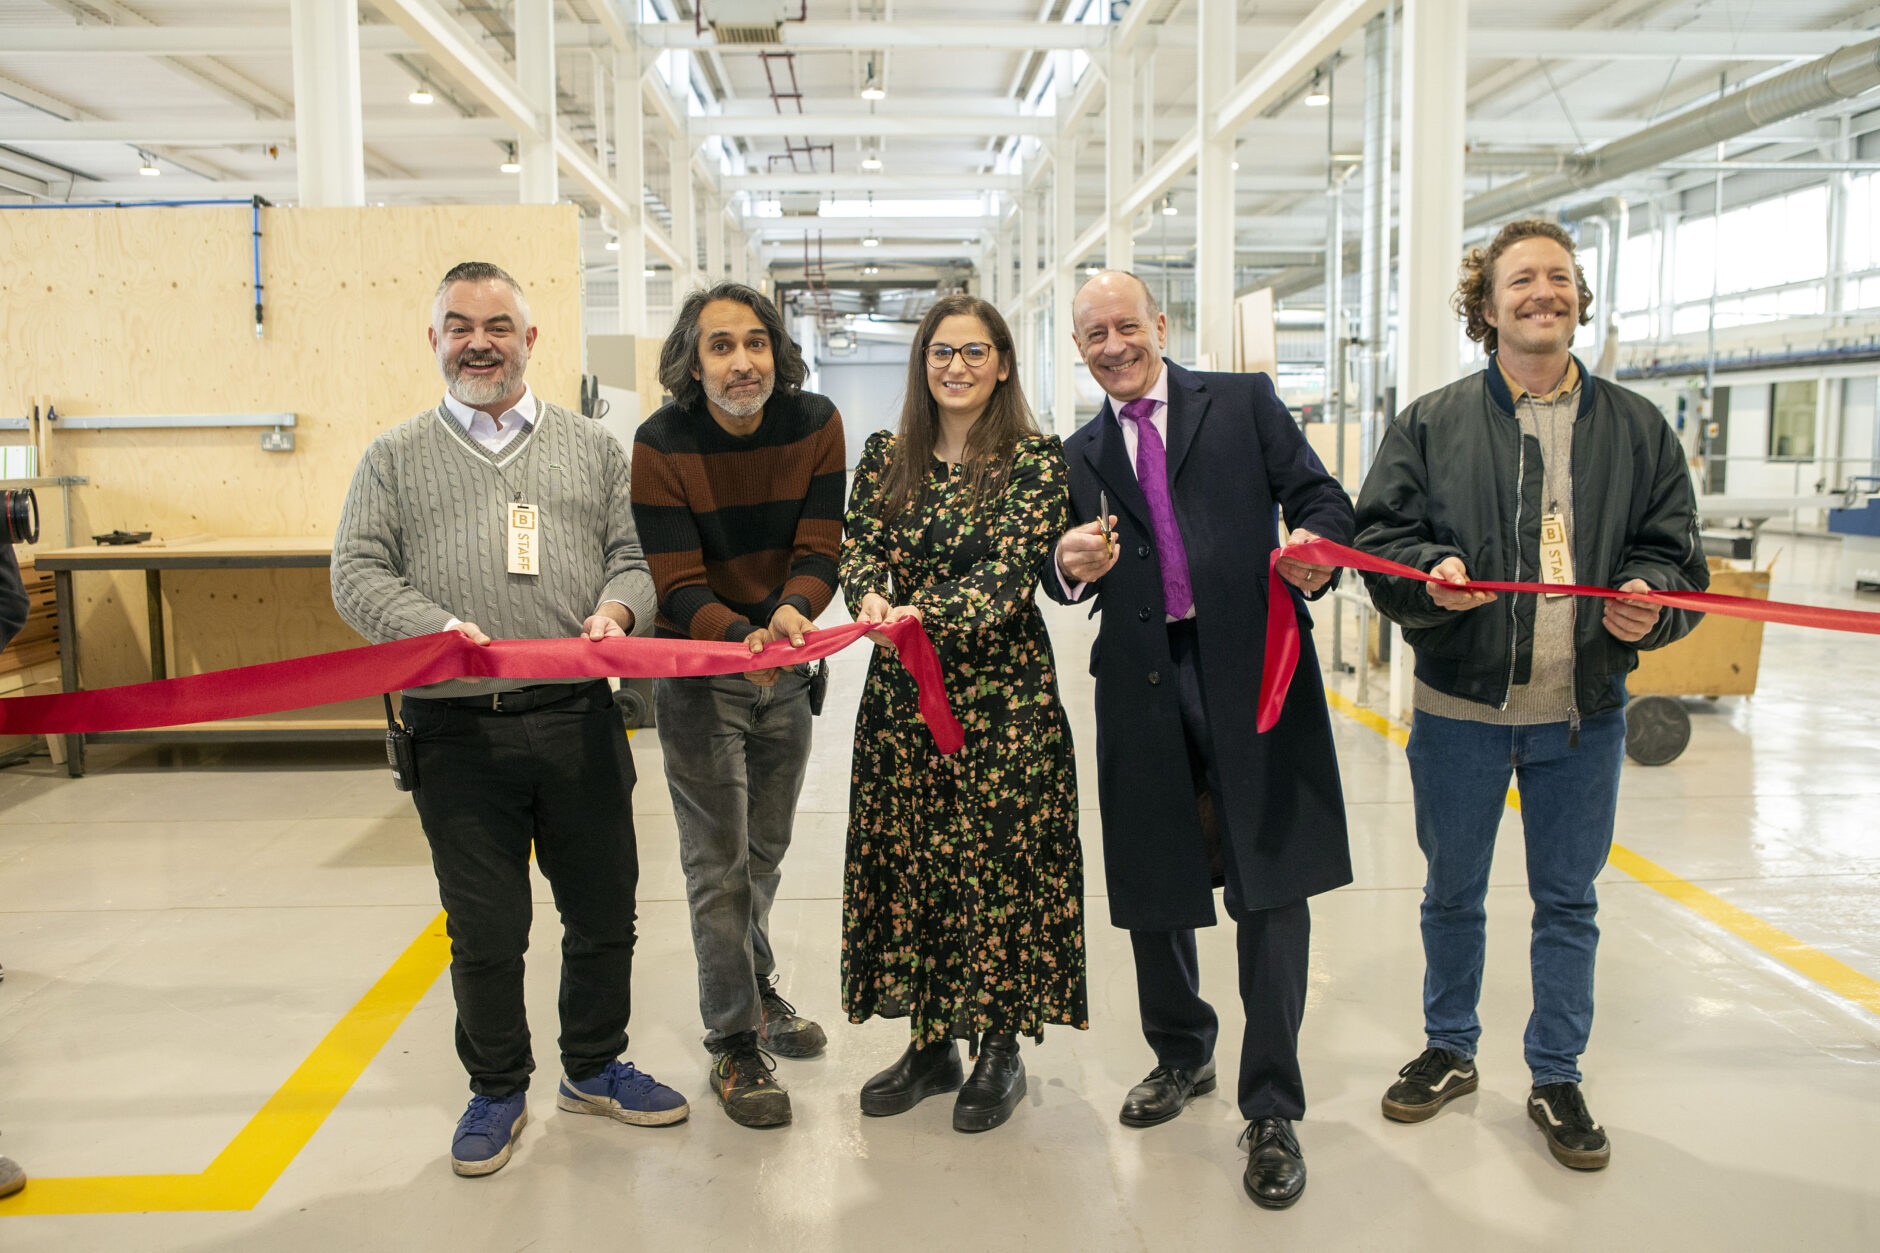 Nesil Caliskan, Leader, Enfield Council and Jules Pipe, Deputy Mayor of London, Regeneration, Skills and Planning, join Building Bloqs' co-founders and directors Al Parra, Vinny Navray (from left) and Arnaud Nichols (right) in celebrating the opening of Building Bloqs' new open access factory at Meridian Water, Upper Edmonton, 10 February 2022. Architects: 5th Studio. Photo courtesy of Enfield Council.